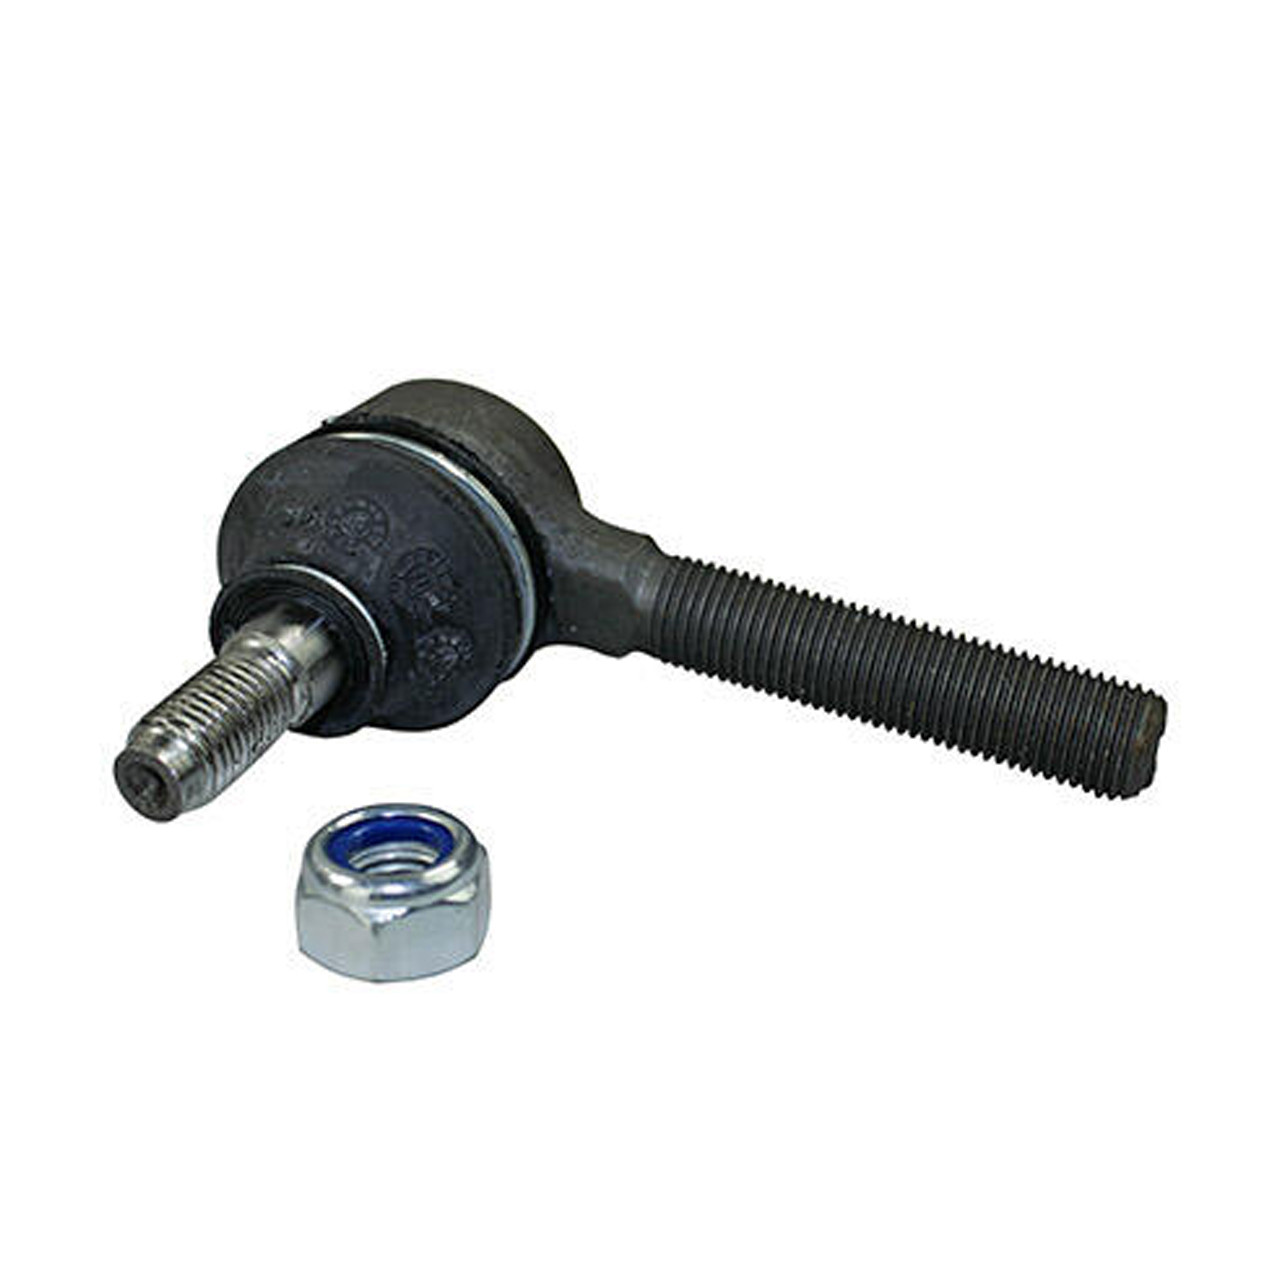 VWC-311-415-812-C - (311415812C) QUALITY REPRODUCTION - TIE ROD END - RIGHT  HAND THREAD - BEETLE 5/